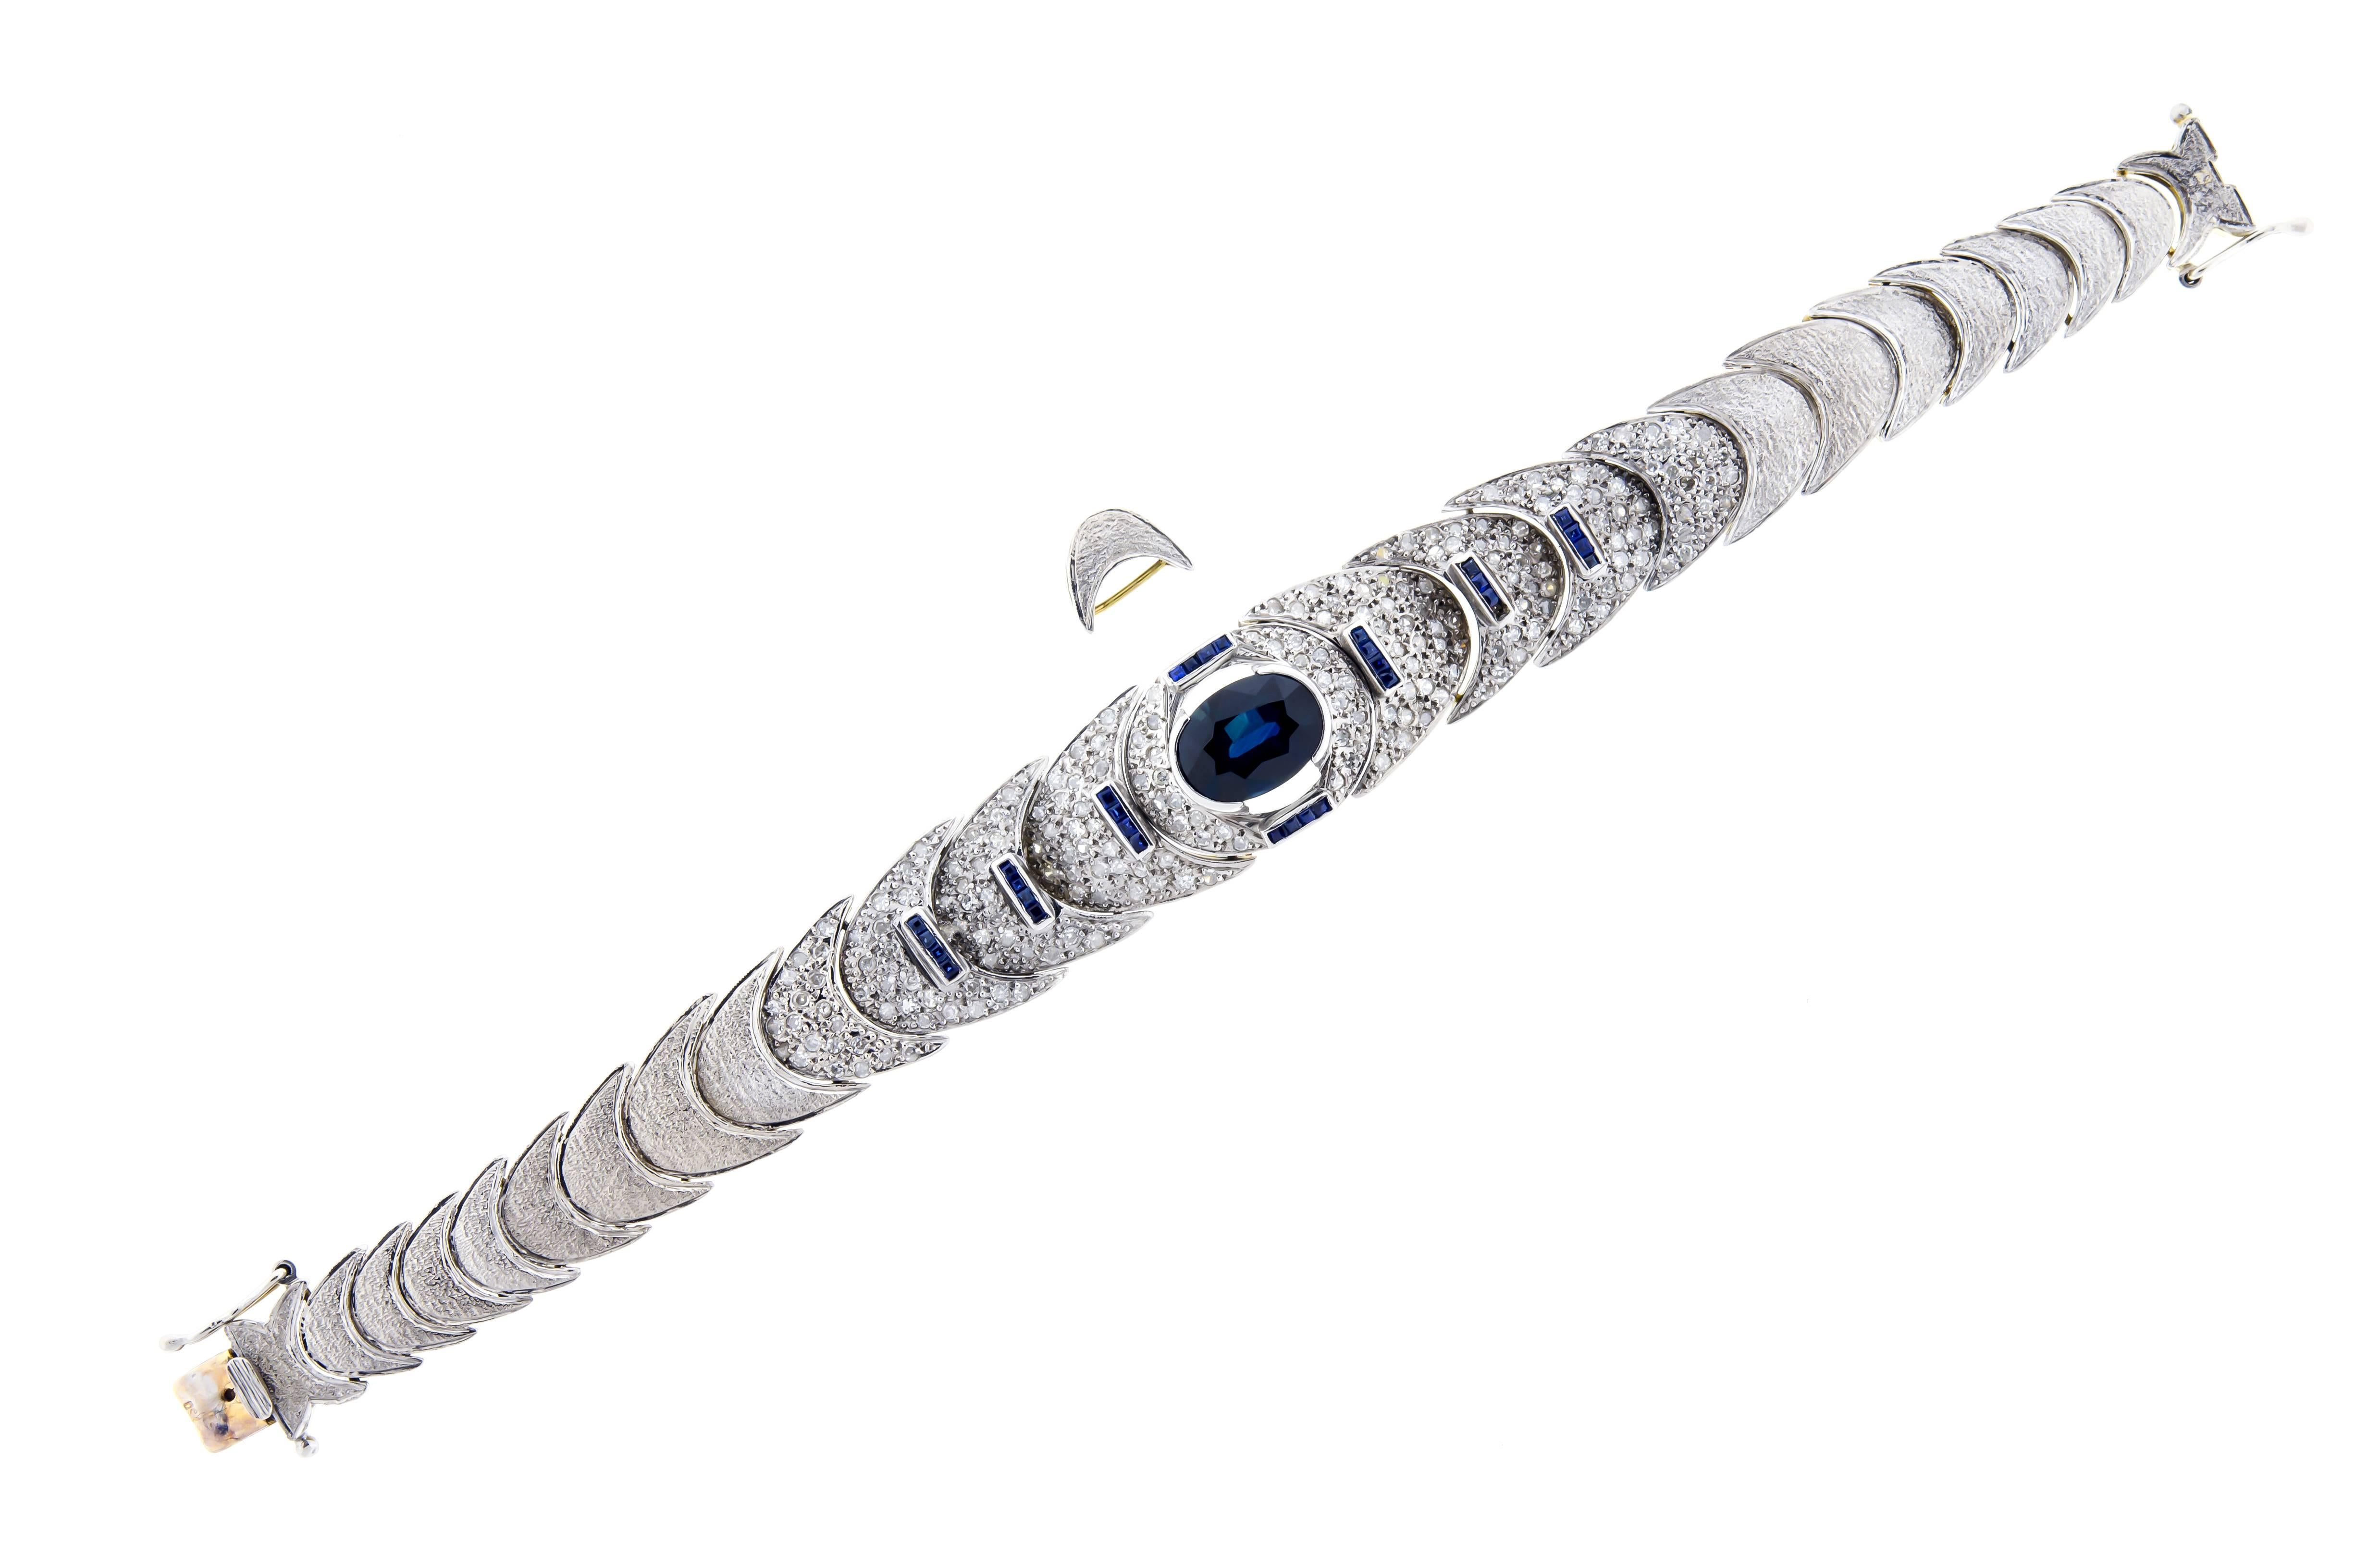 Beautiful lady's 1970s blue sapphire diamond and 18kt white and yellow gold flexible bracelet cast and hand assembled half moon link bracelet with v spring closure with two safety clasps and a textured finish.  Bracelet is 6.5 inches long with an